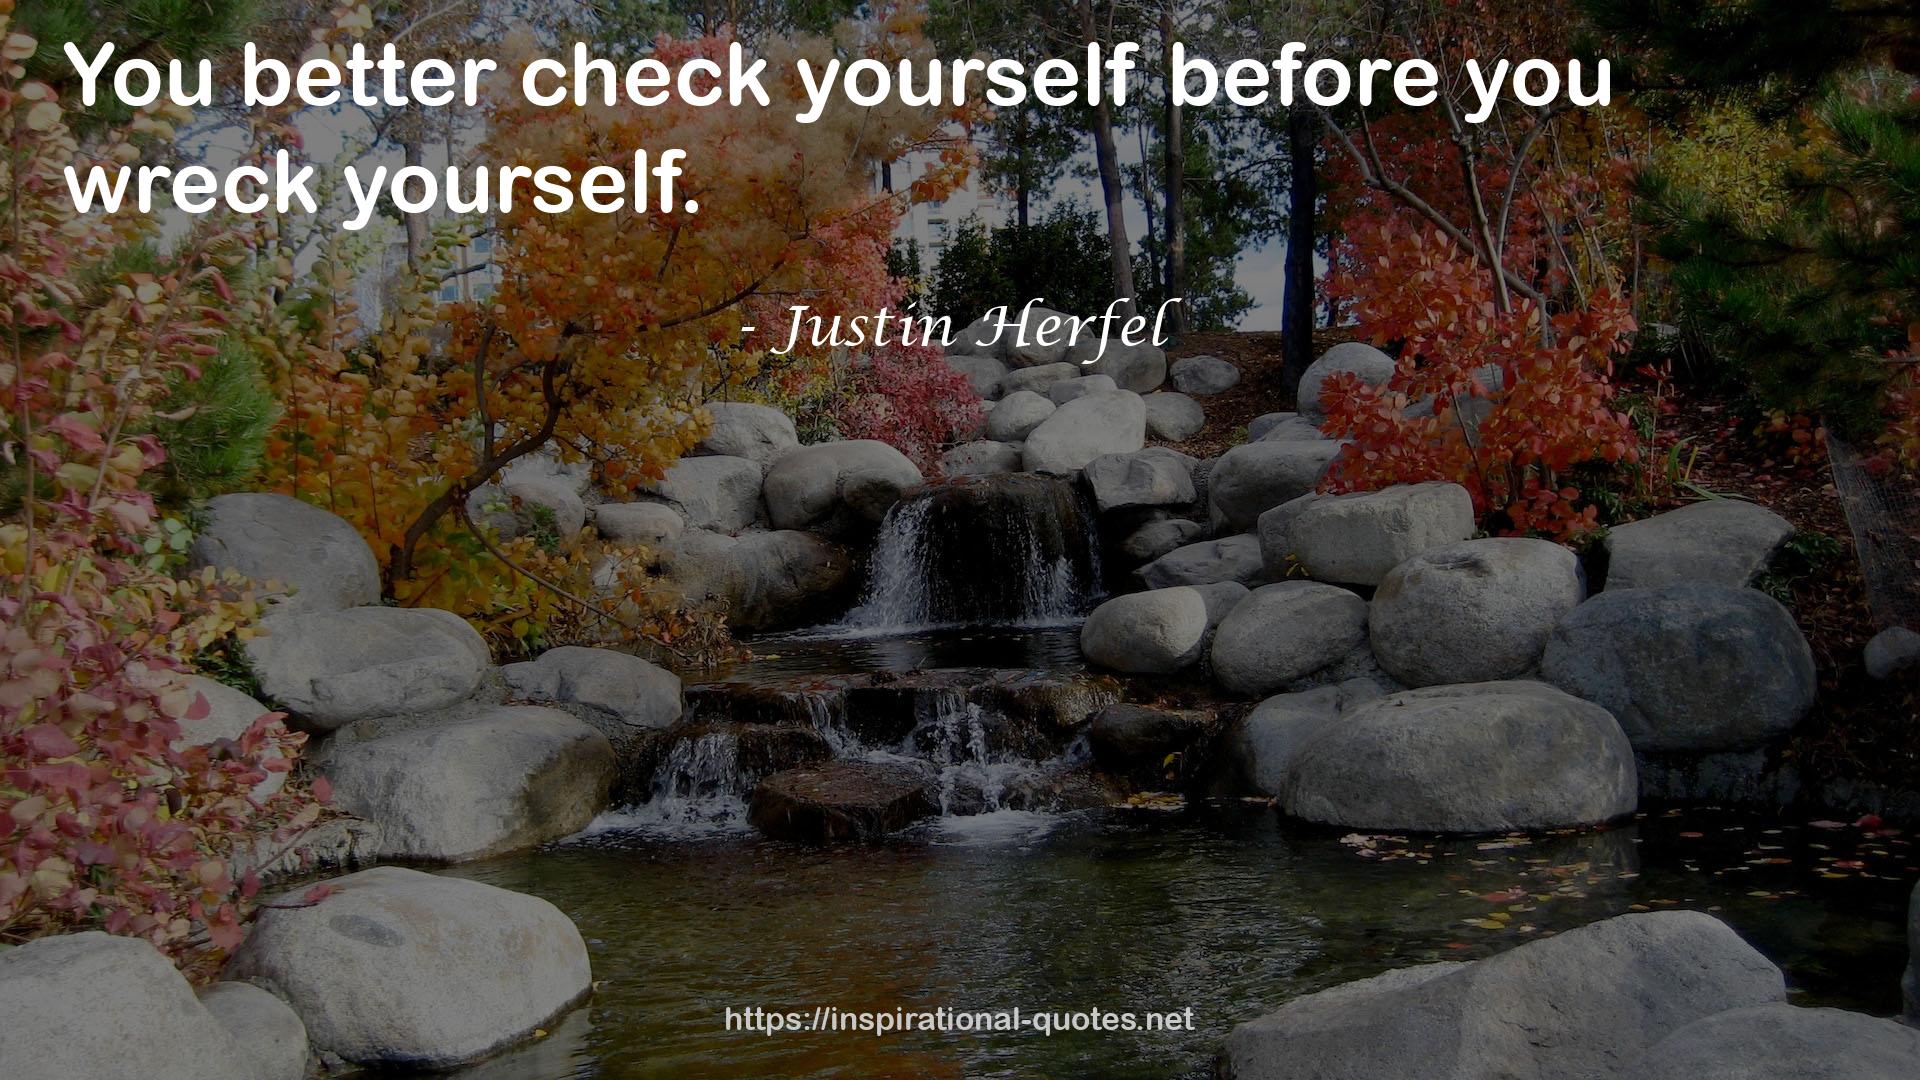 Justin Herfel QUOTES